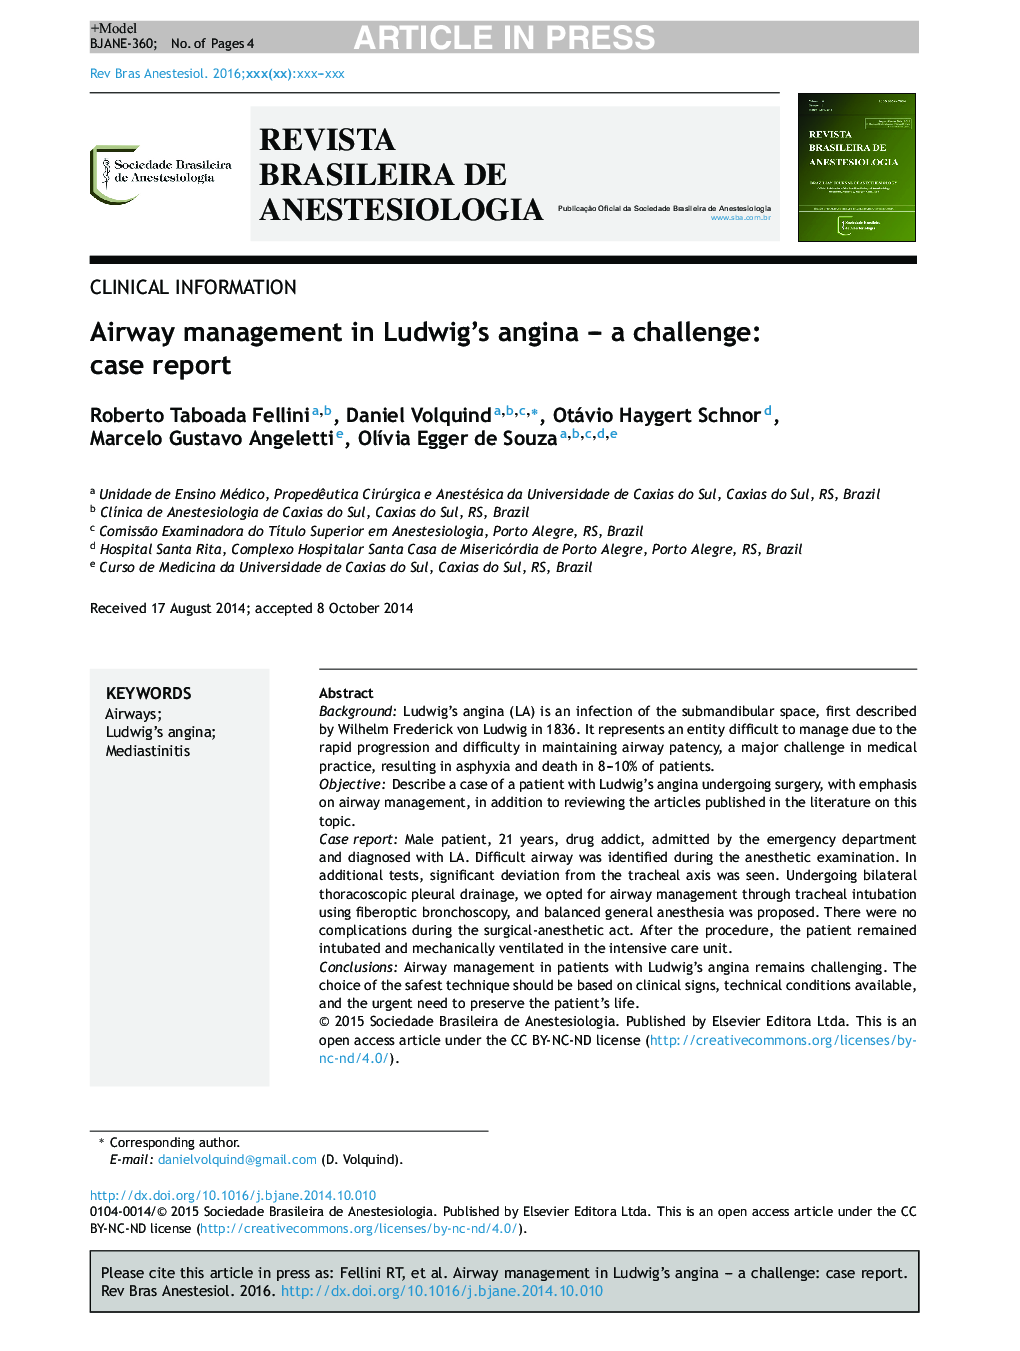 Airway management in Ludwig's angina - a challenge: case report